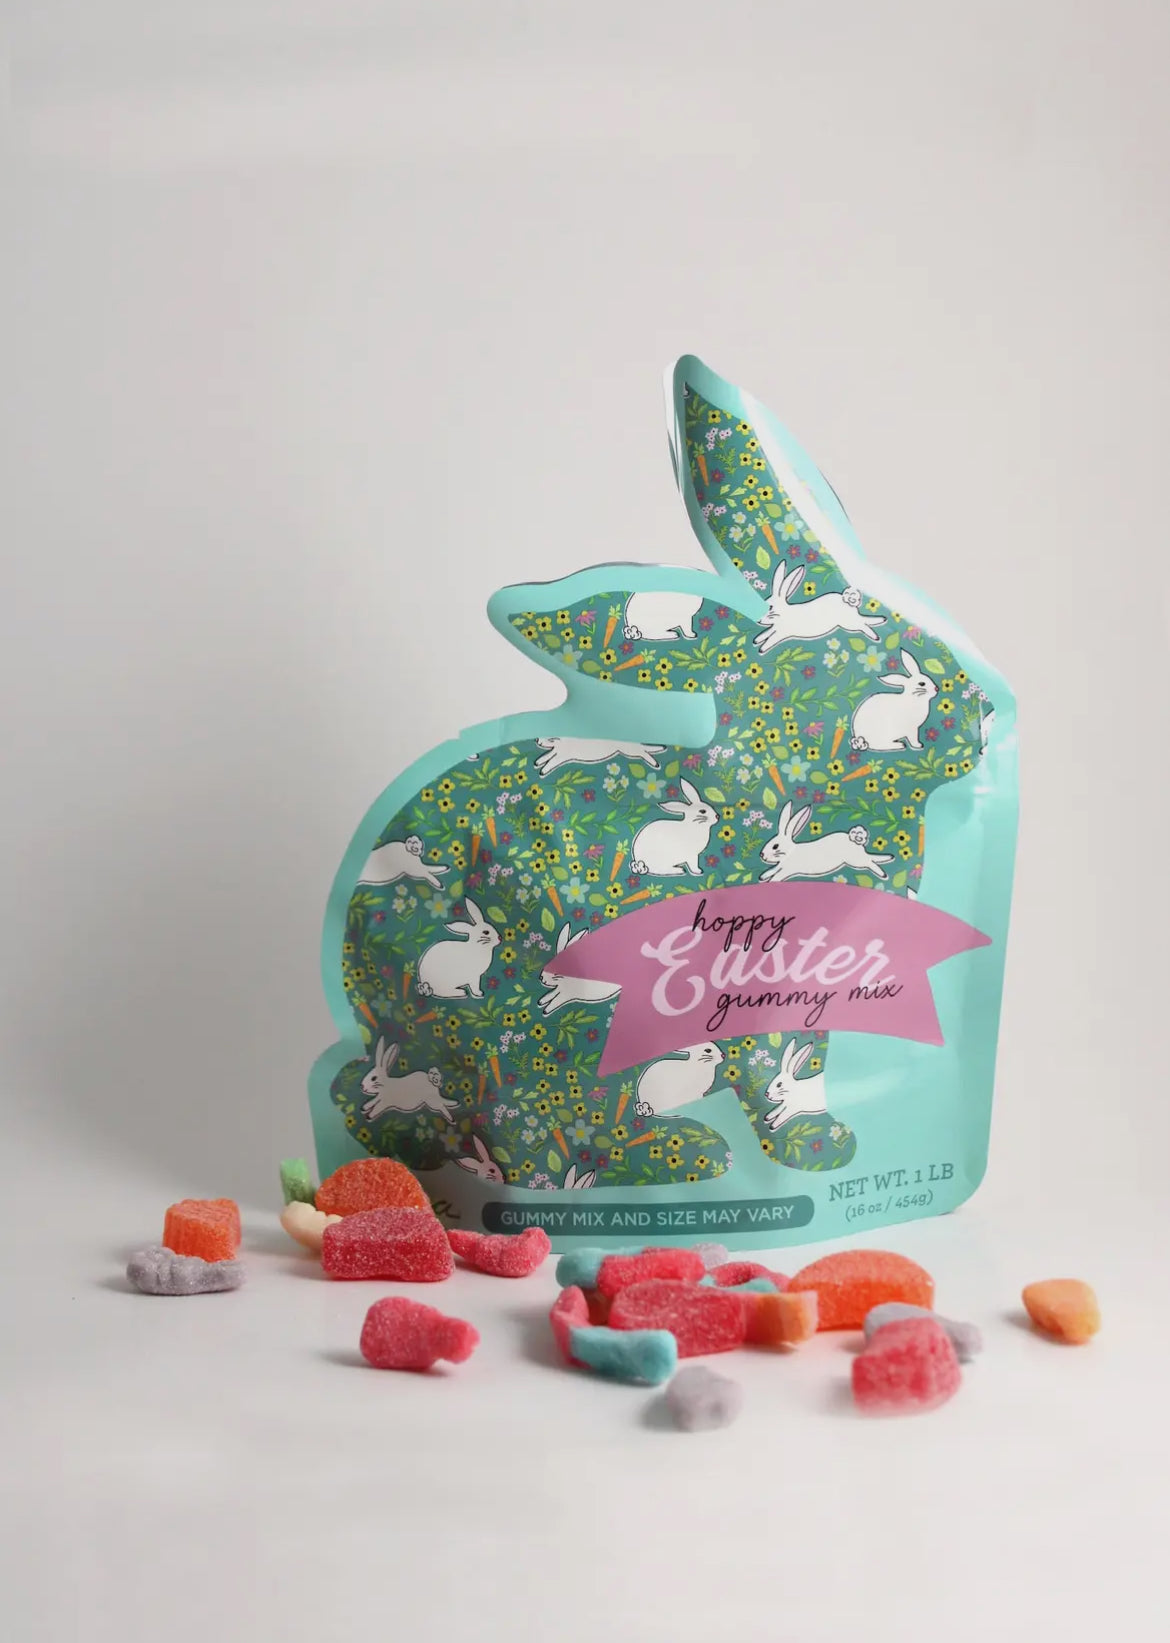 Easter Bunny Gummies 1LB Pouch